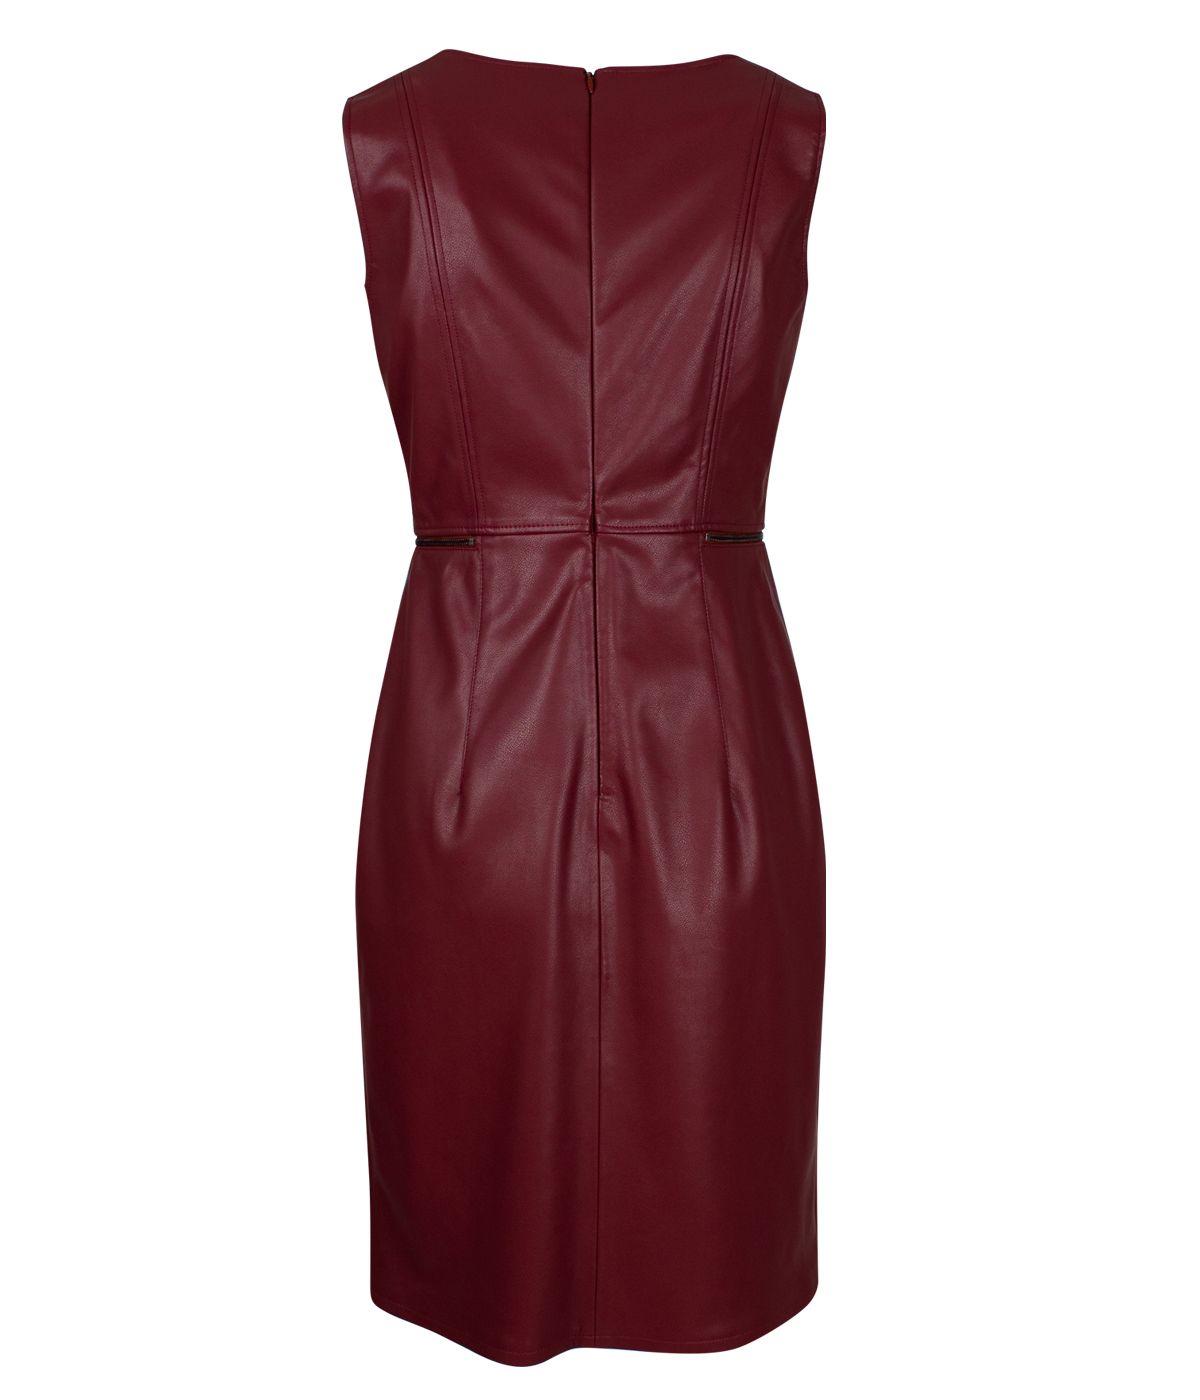 Faux leather sleeveless dress with round neckline and decorative zippers on the waist 1